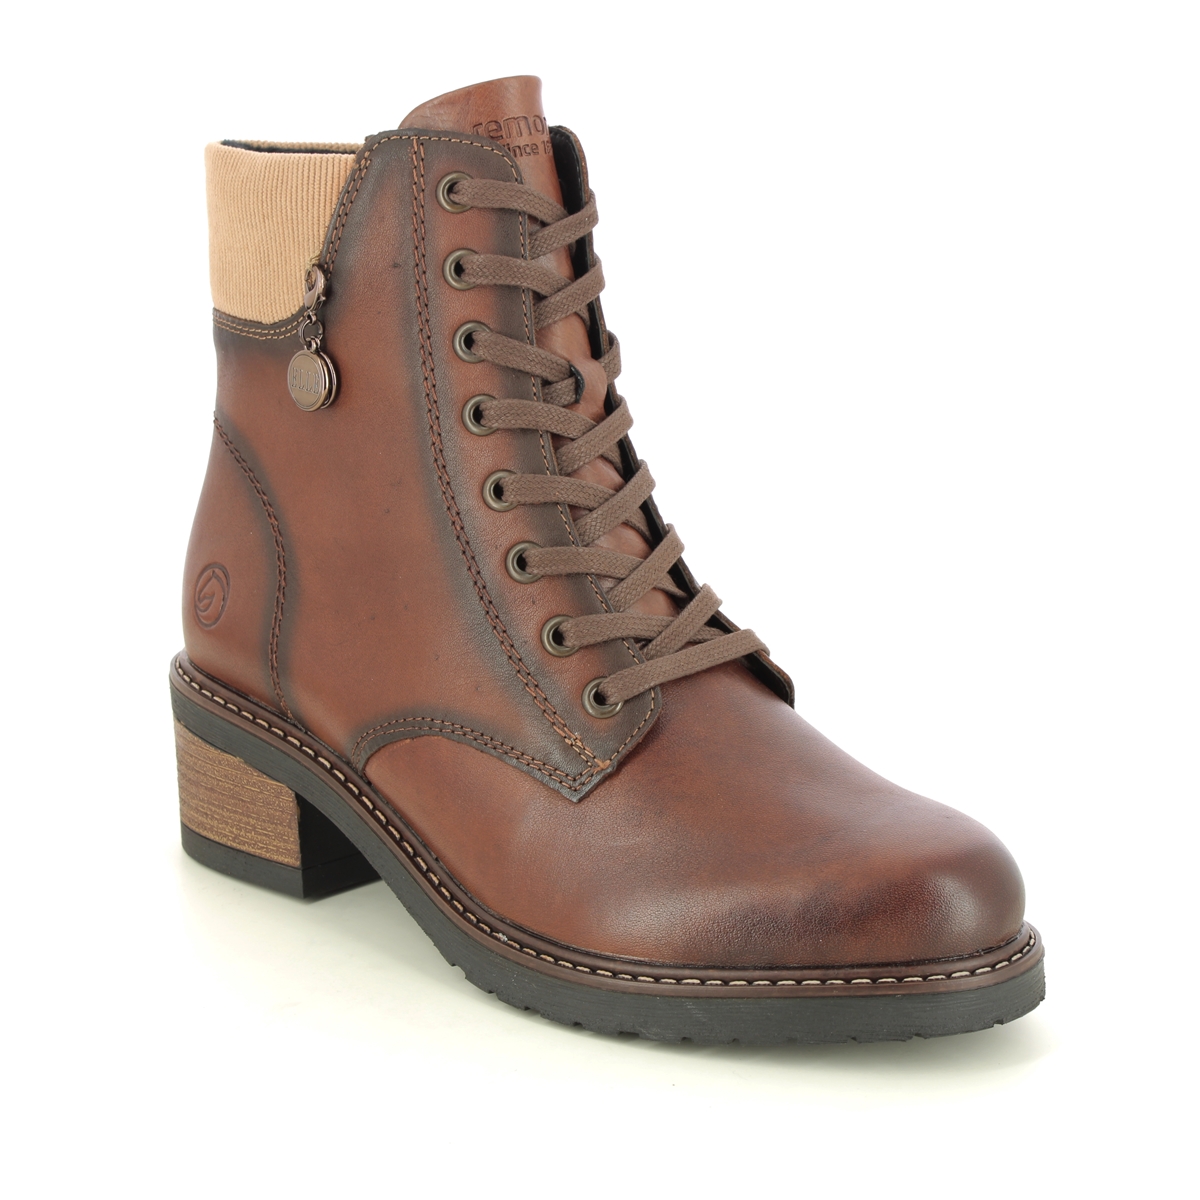 Remonte Menarem Elle Brown Leather Womens Lace Up Boots D1A70-22 In Size 40 In Plain Brown Leather